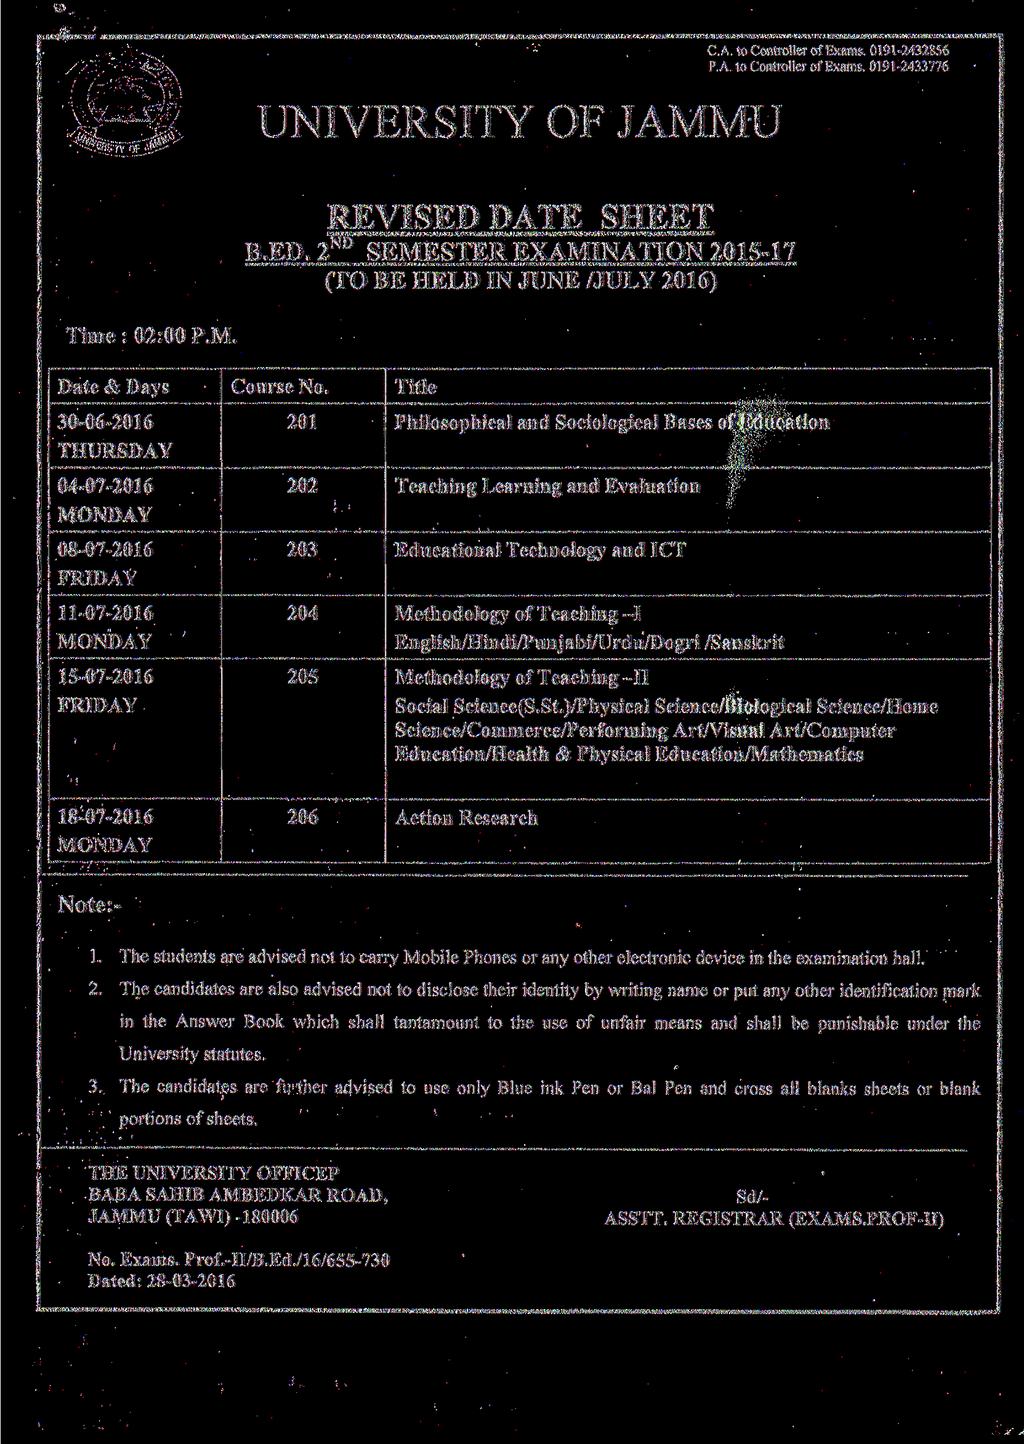 C.A. to Controller of Exams. 0191-2432856 P.A. to Controller of Exams. 0191-2433776 UNIVERSITY OF JAMMU REVISED DATE SHEET,ND >u B.ED. 2 SEMESTER EXAMINATION 2015-17 (TO BE HELD IN JUNE /JULY 2016) Time : 02:00 P.